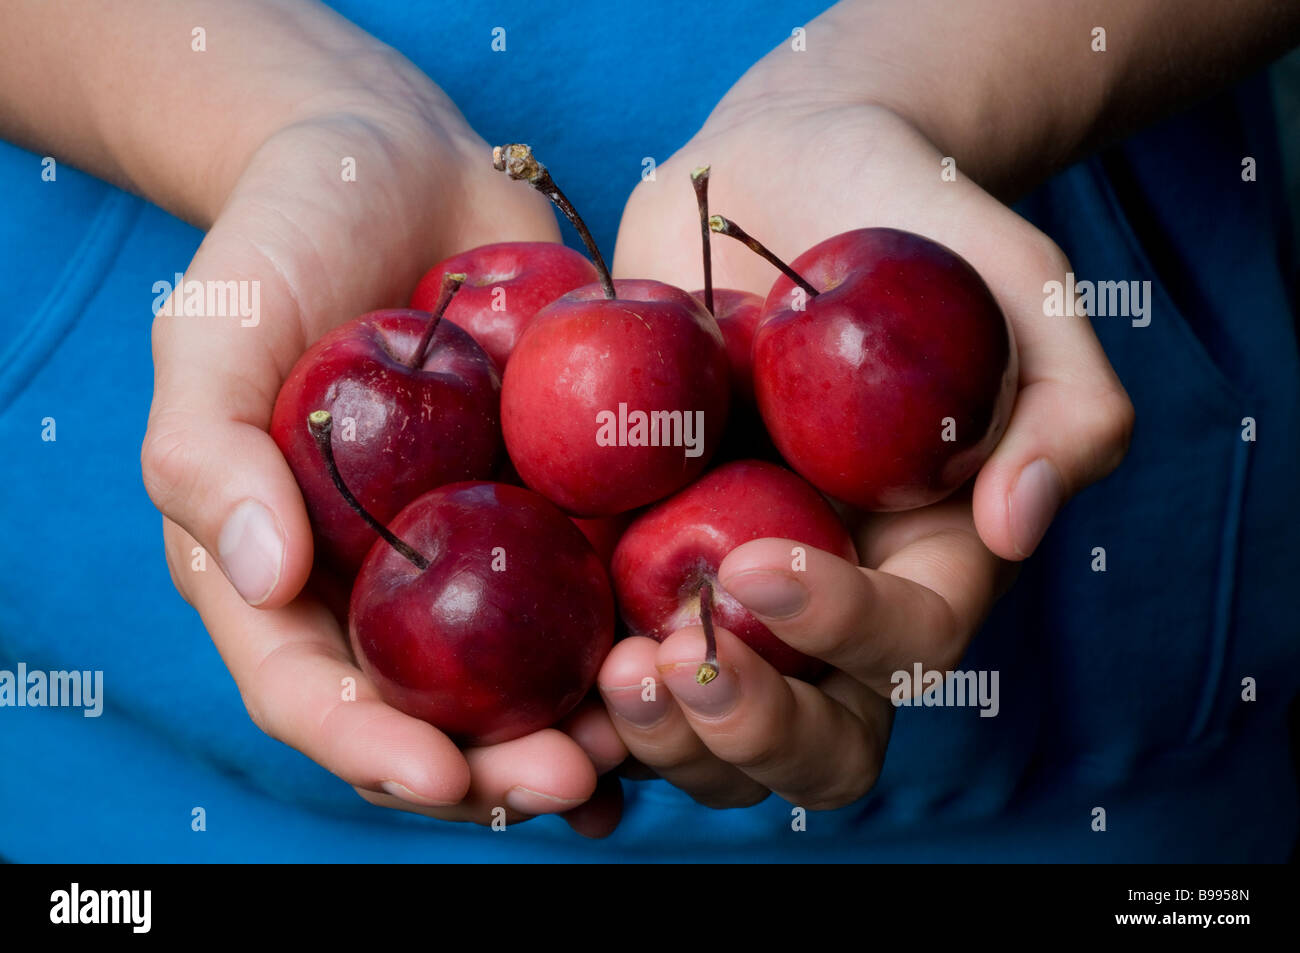 Hands holding crab apples Banque D'Images